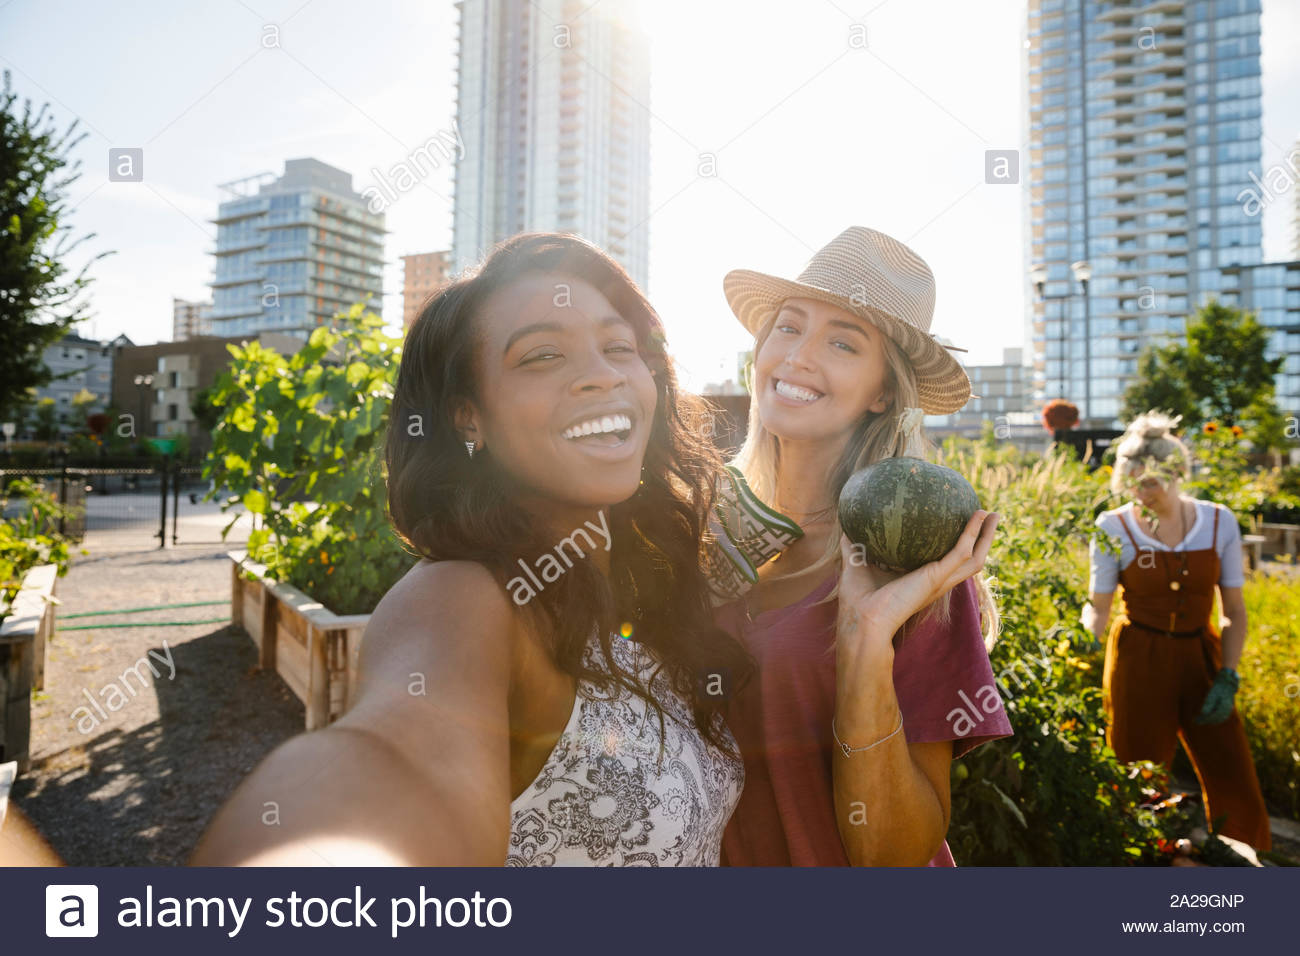 Personal perspective young women friends taking selfie in sunny, urban community garden Stock Photo